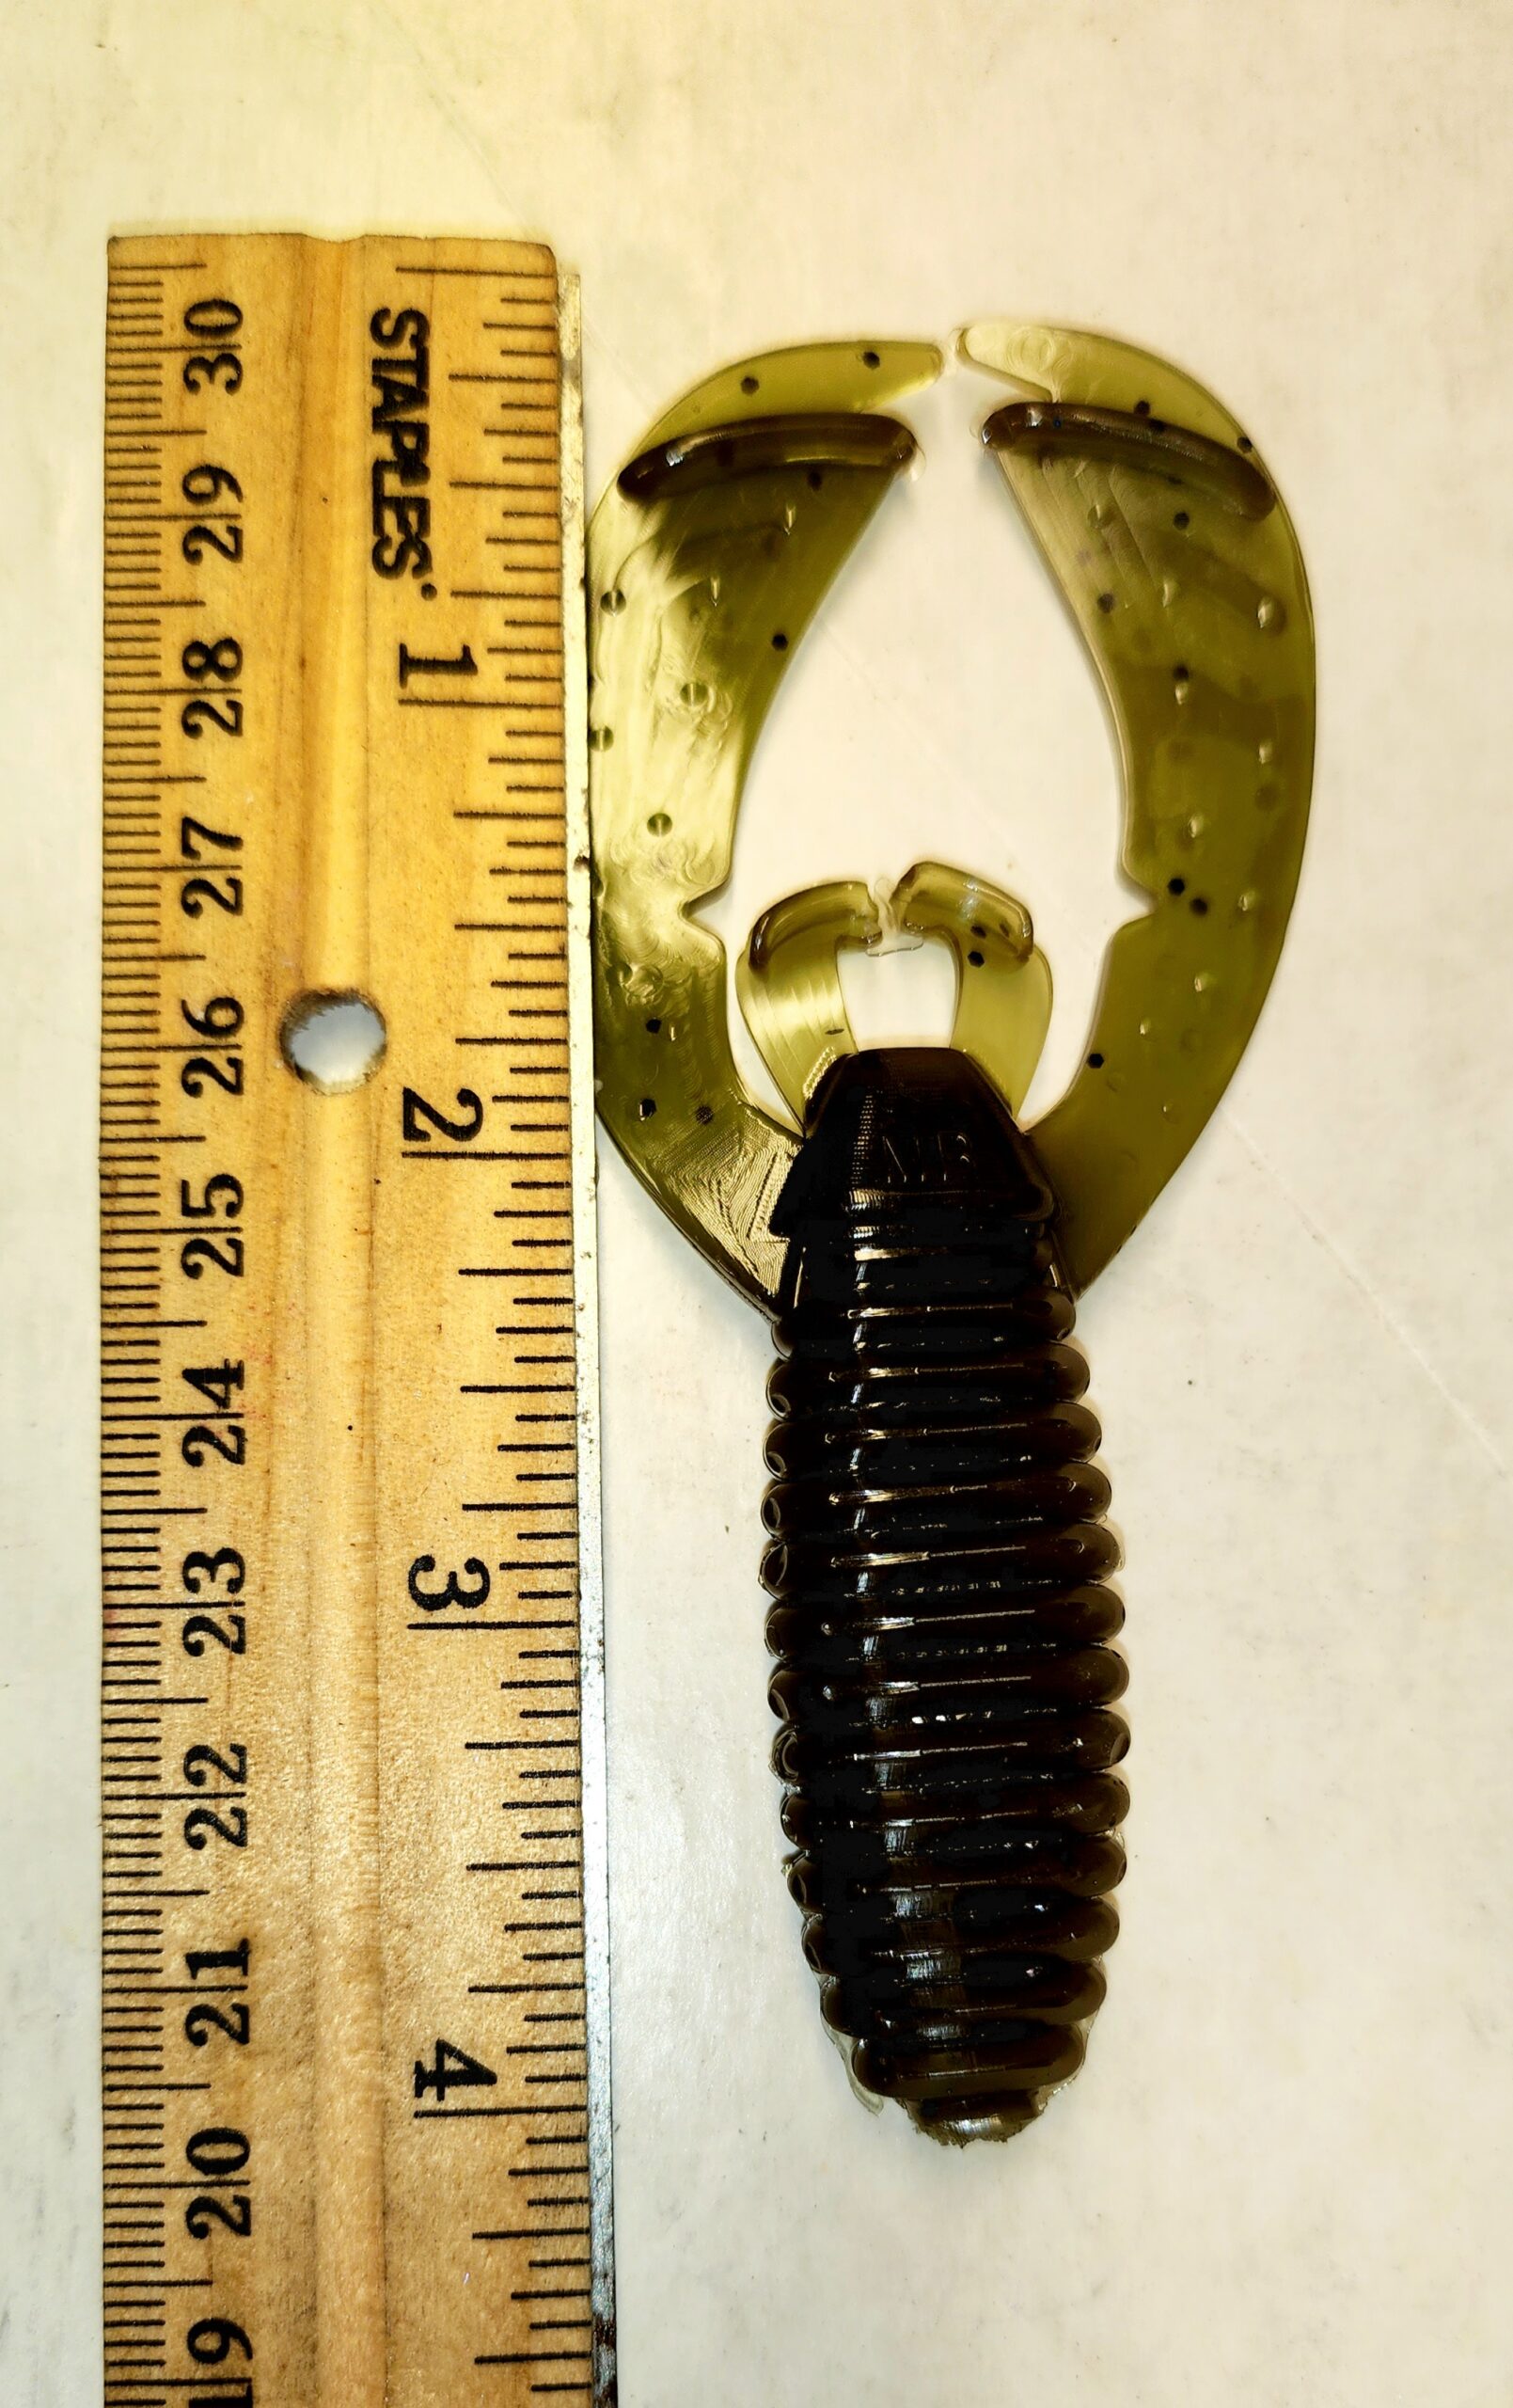 Crappie soft plastic bait 2 1/2 Inch pick a color. We call this bait Buster  - Get Hooked Magic Baits